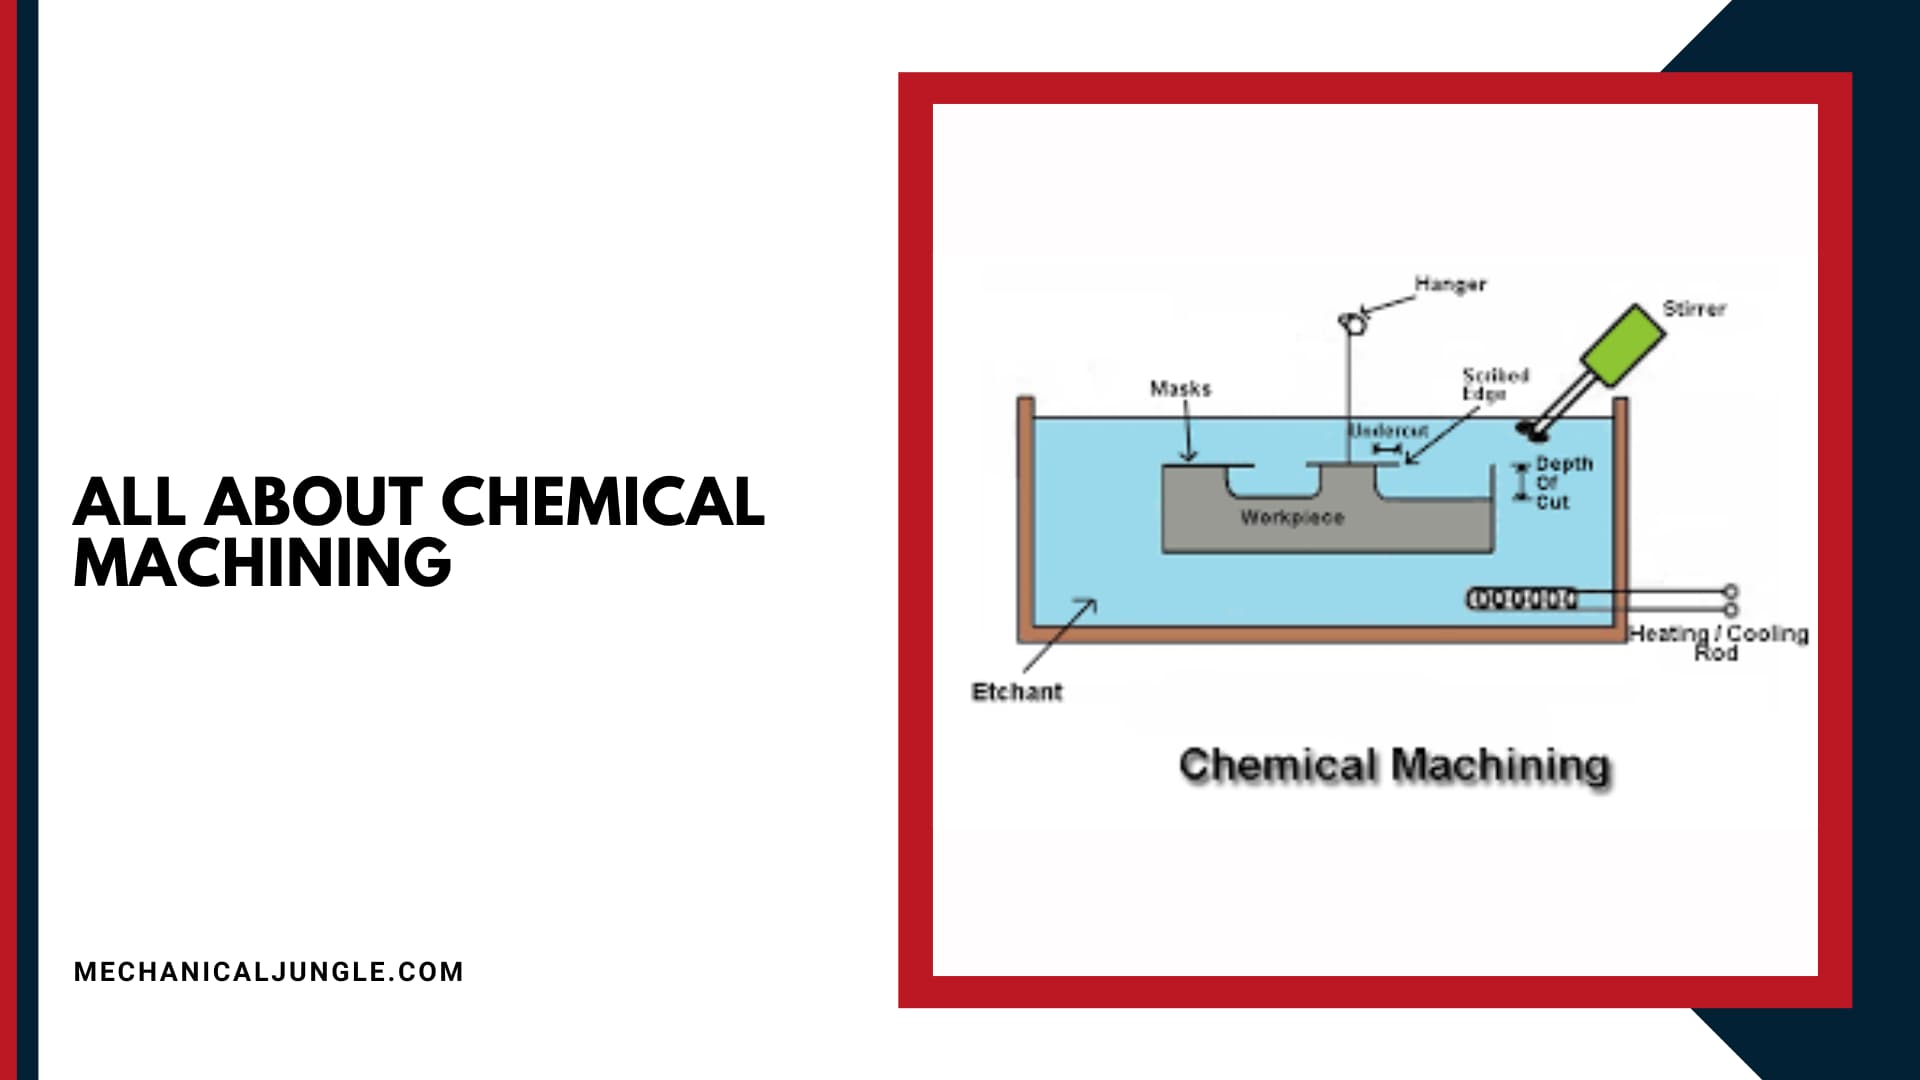 All About Chemical Machining